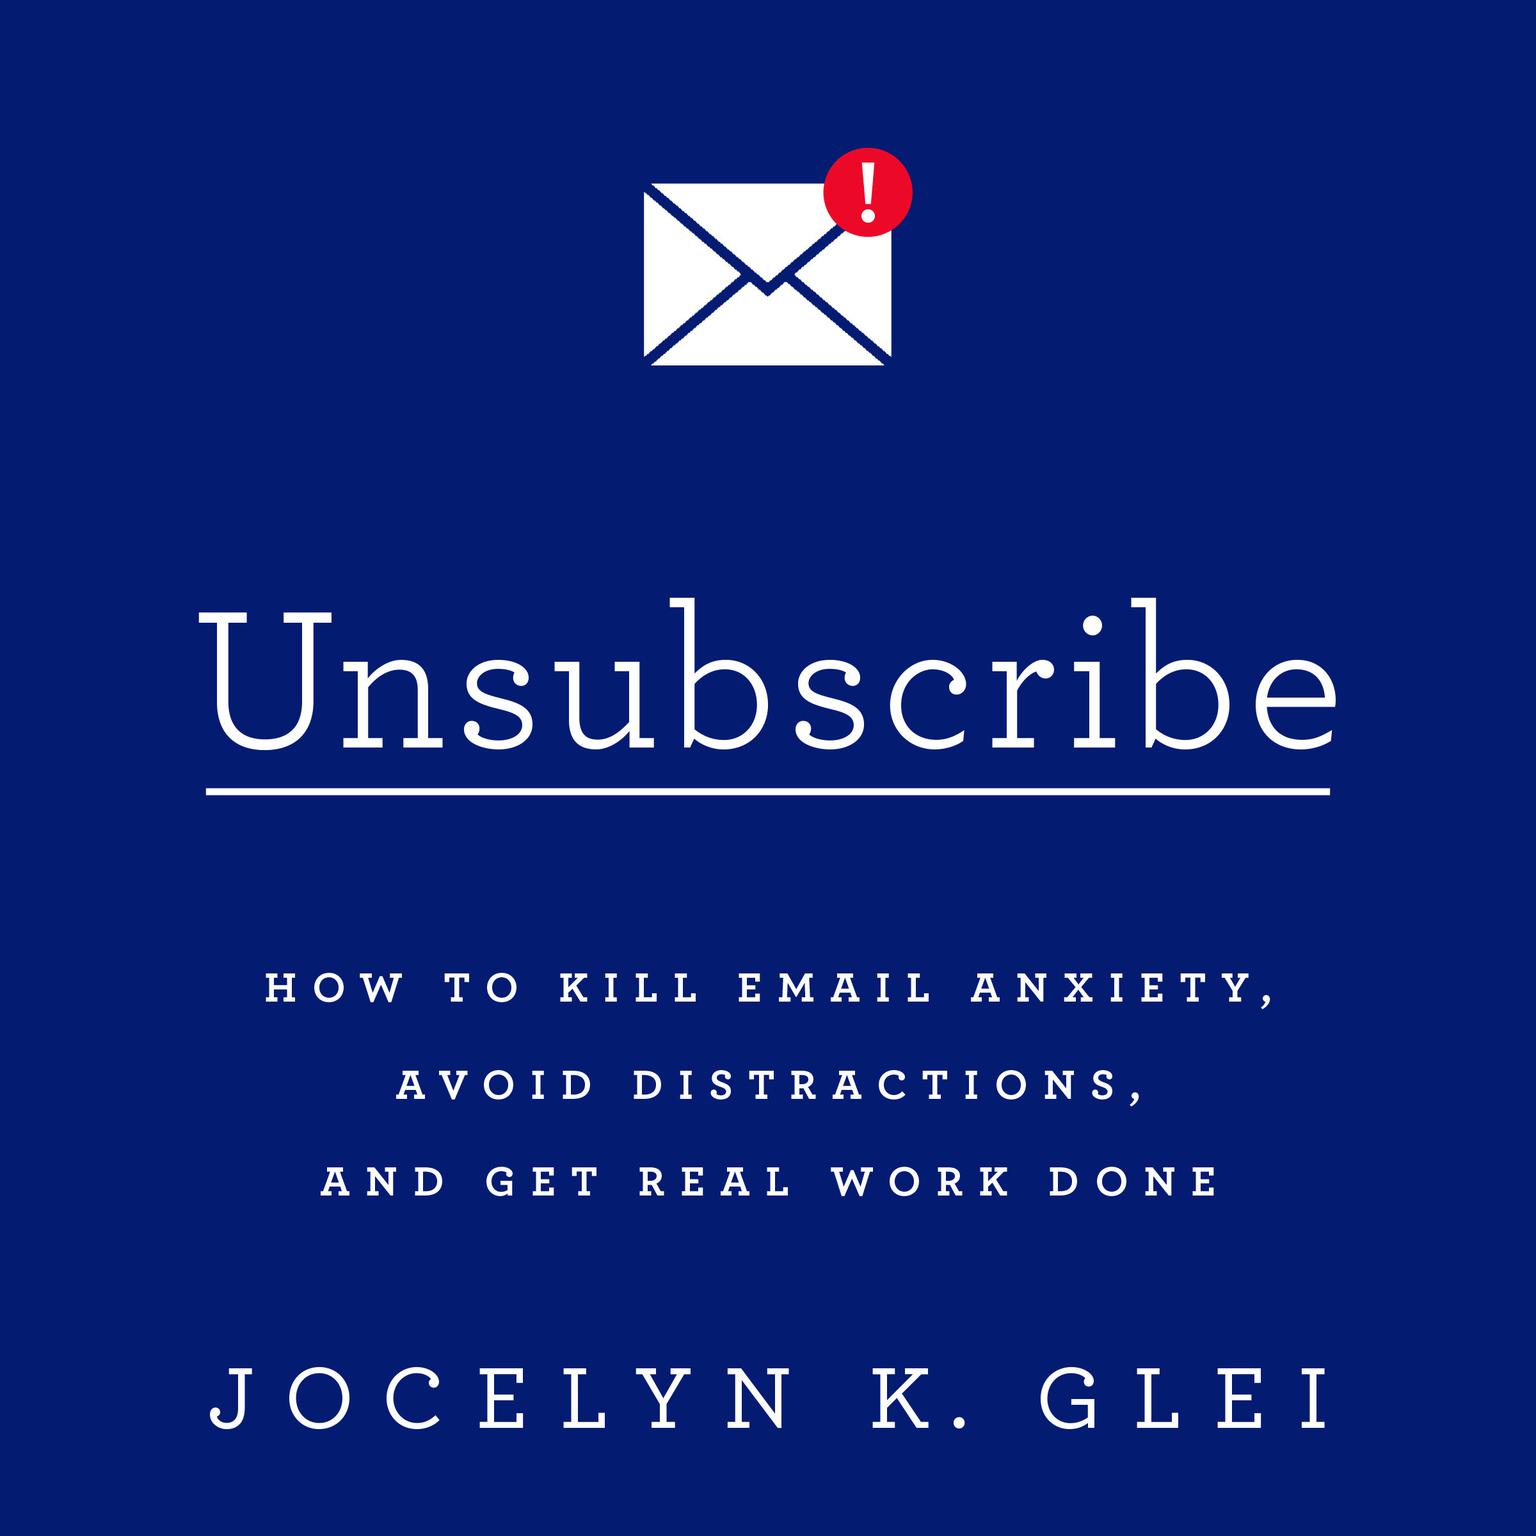 Unsubscribe: How to Kill Email Anxiety, Avoid Distractions, and Get Real Work Done Audiobook, by Jocelyn K. Glei